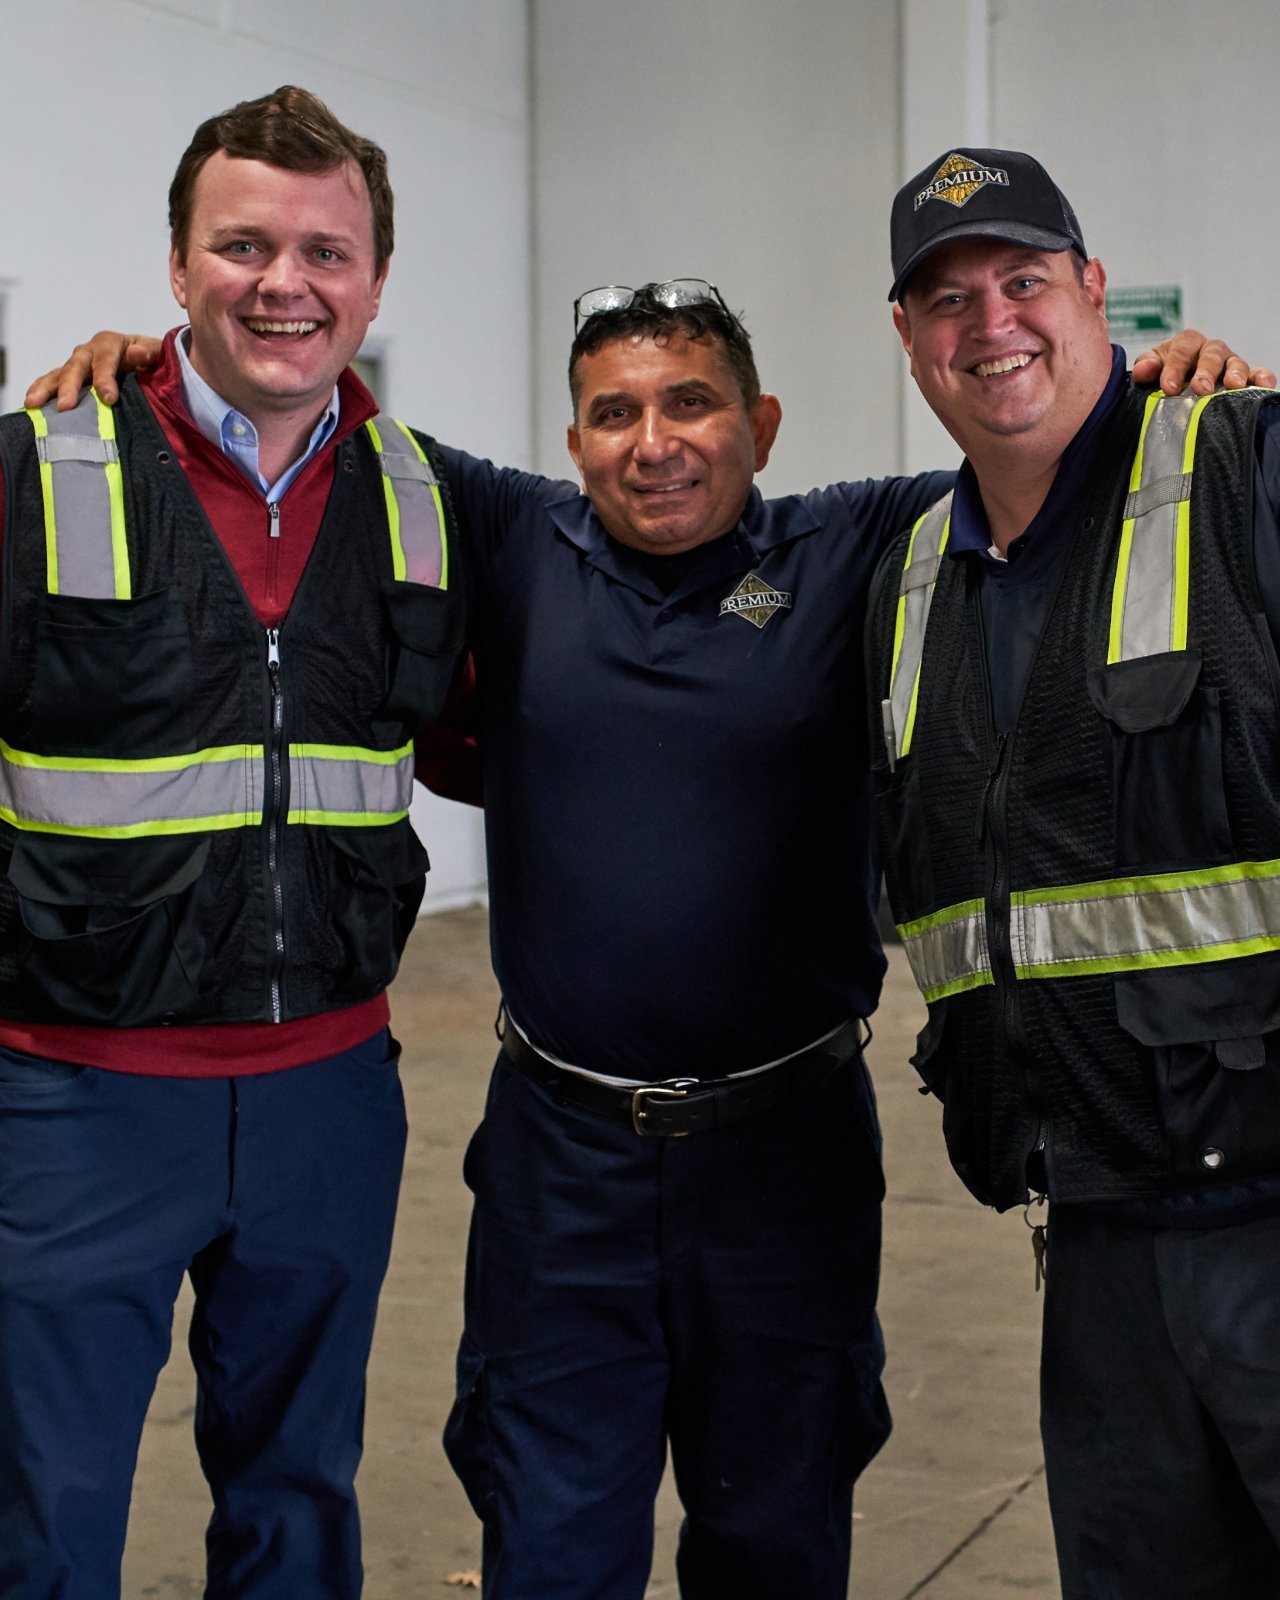 Three warehouse workers standing together for a photo and smiling